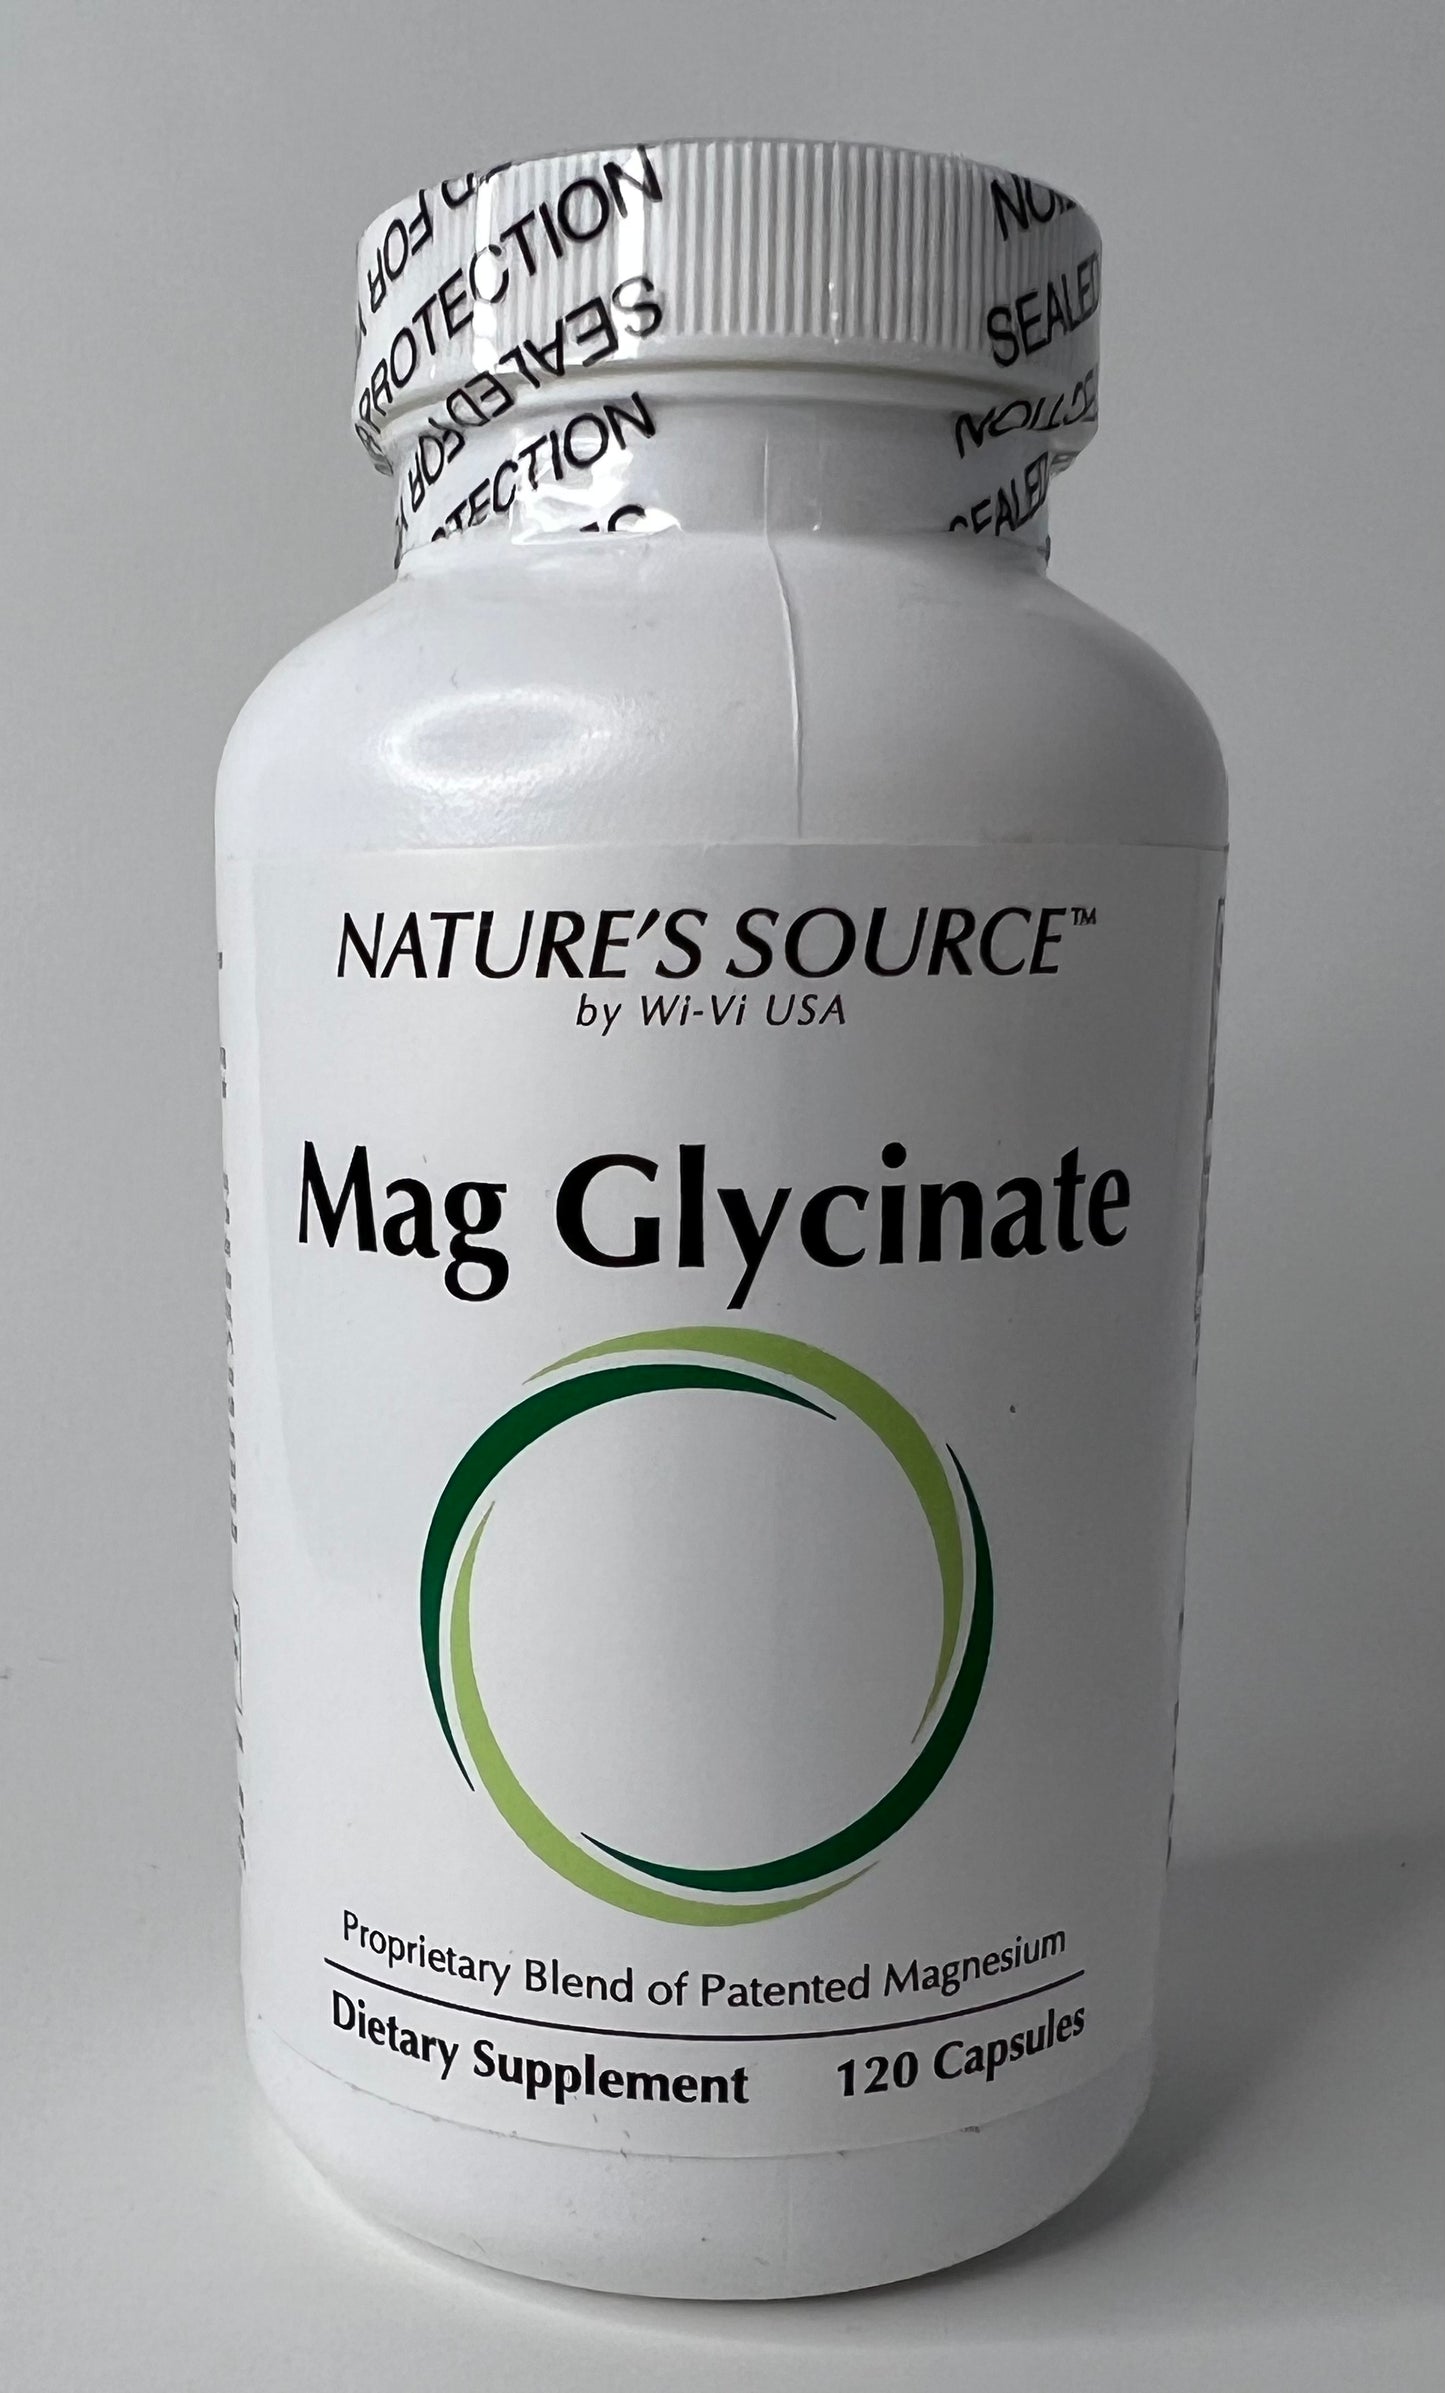 Mag Glycinate - Proprietary Blend of Patented Magnesium by:Nature's Source